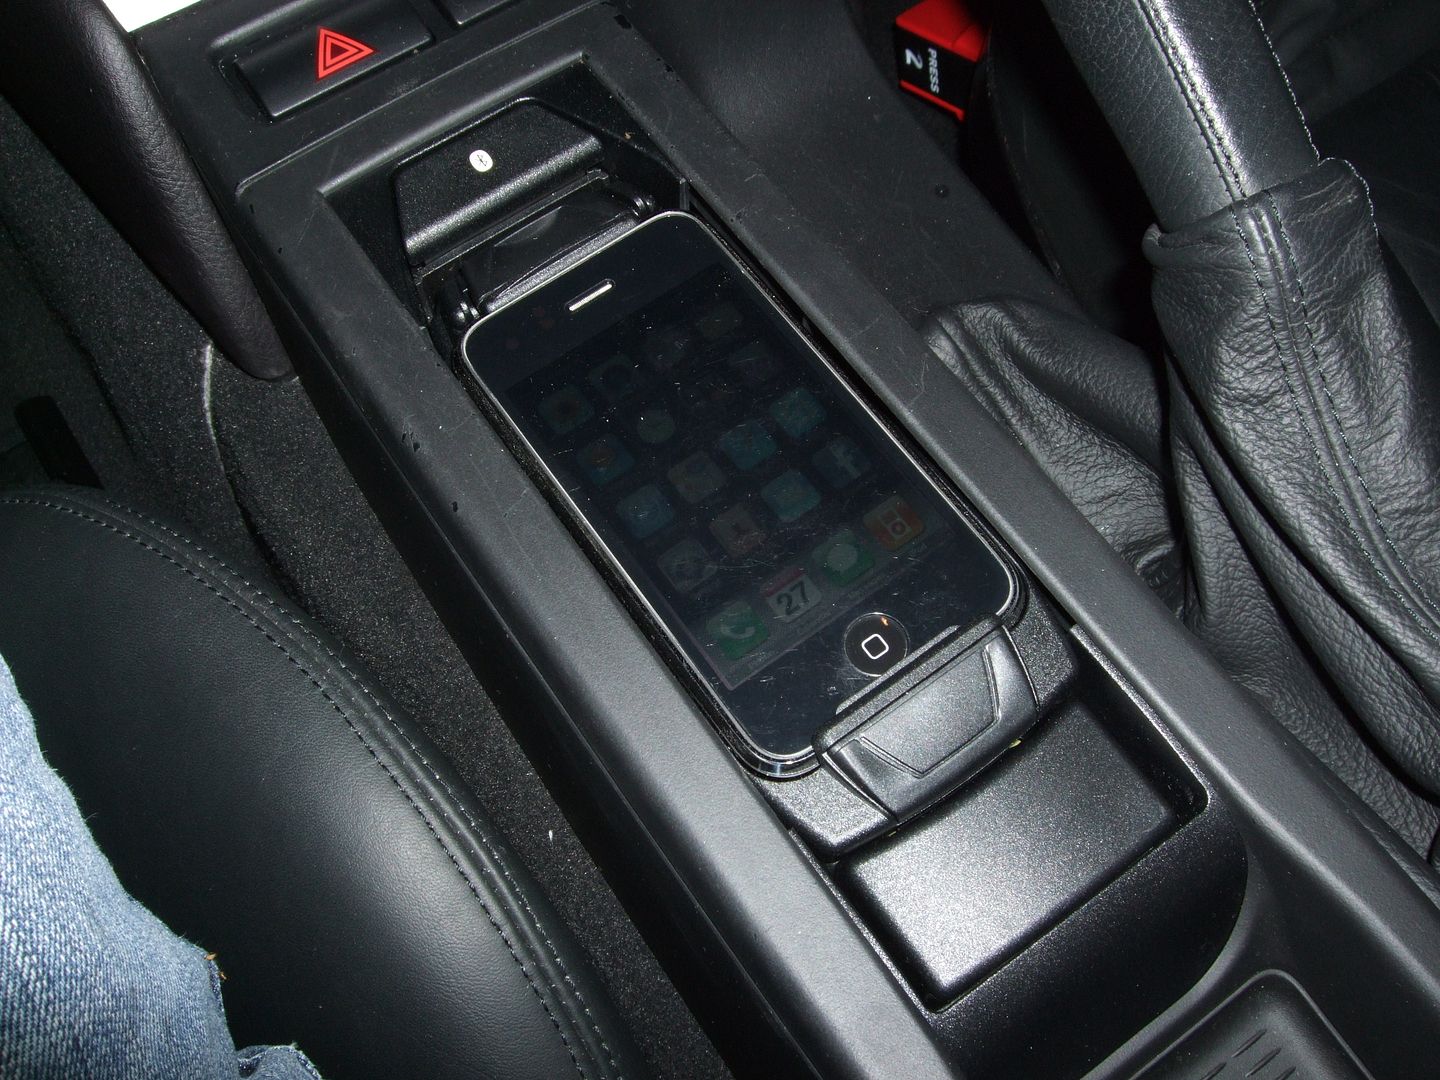 Pair iphone with bmw x5